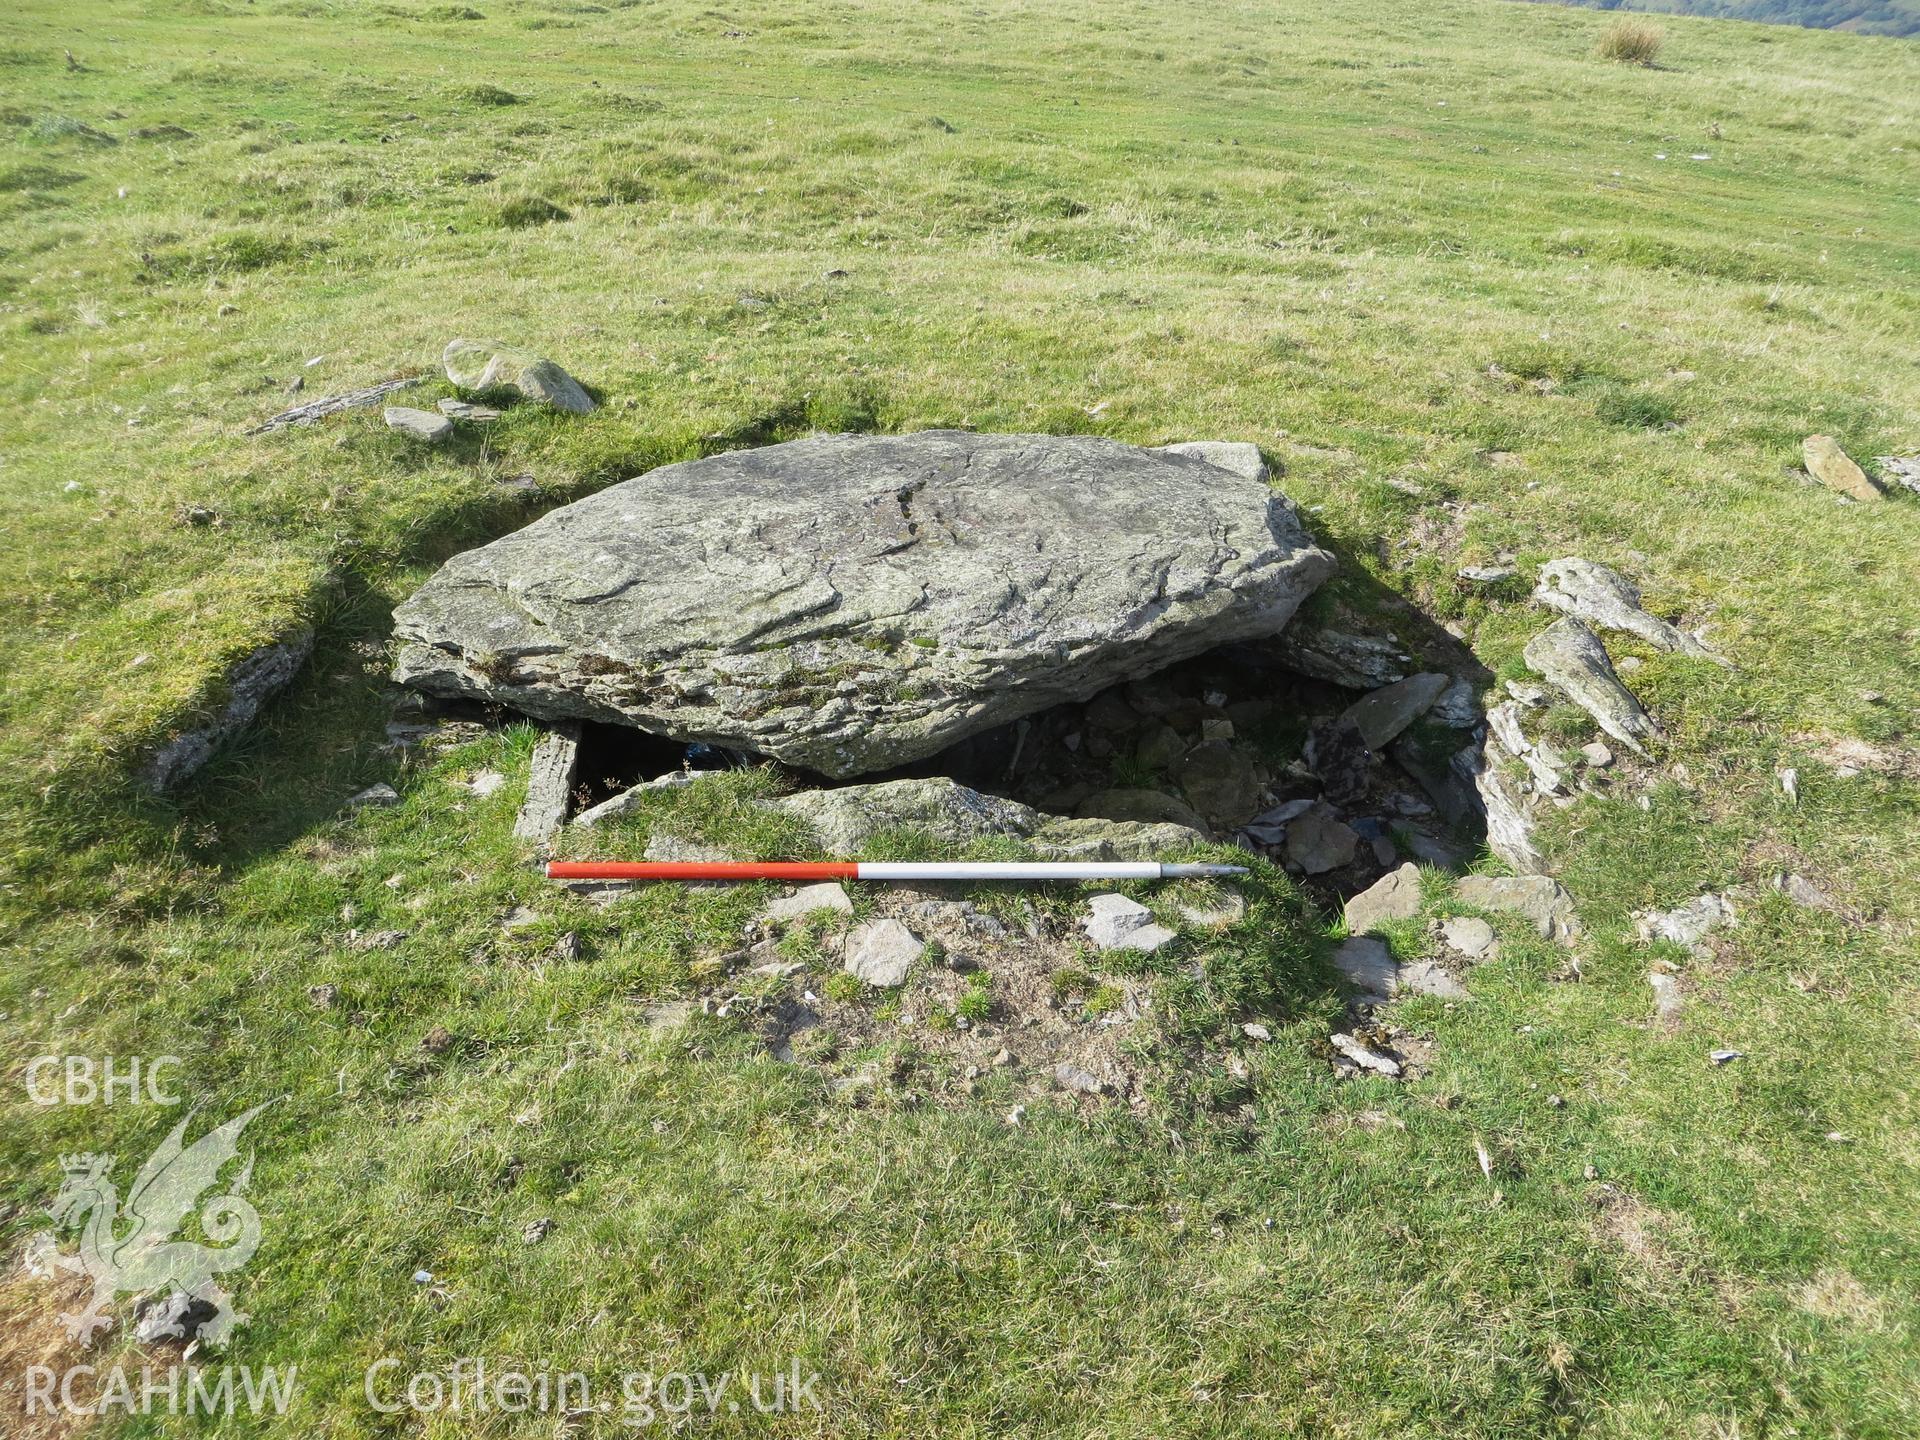 Close-up view of cist; 1m scale.